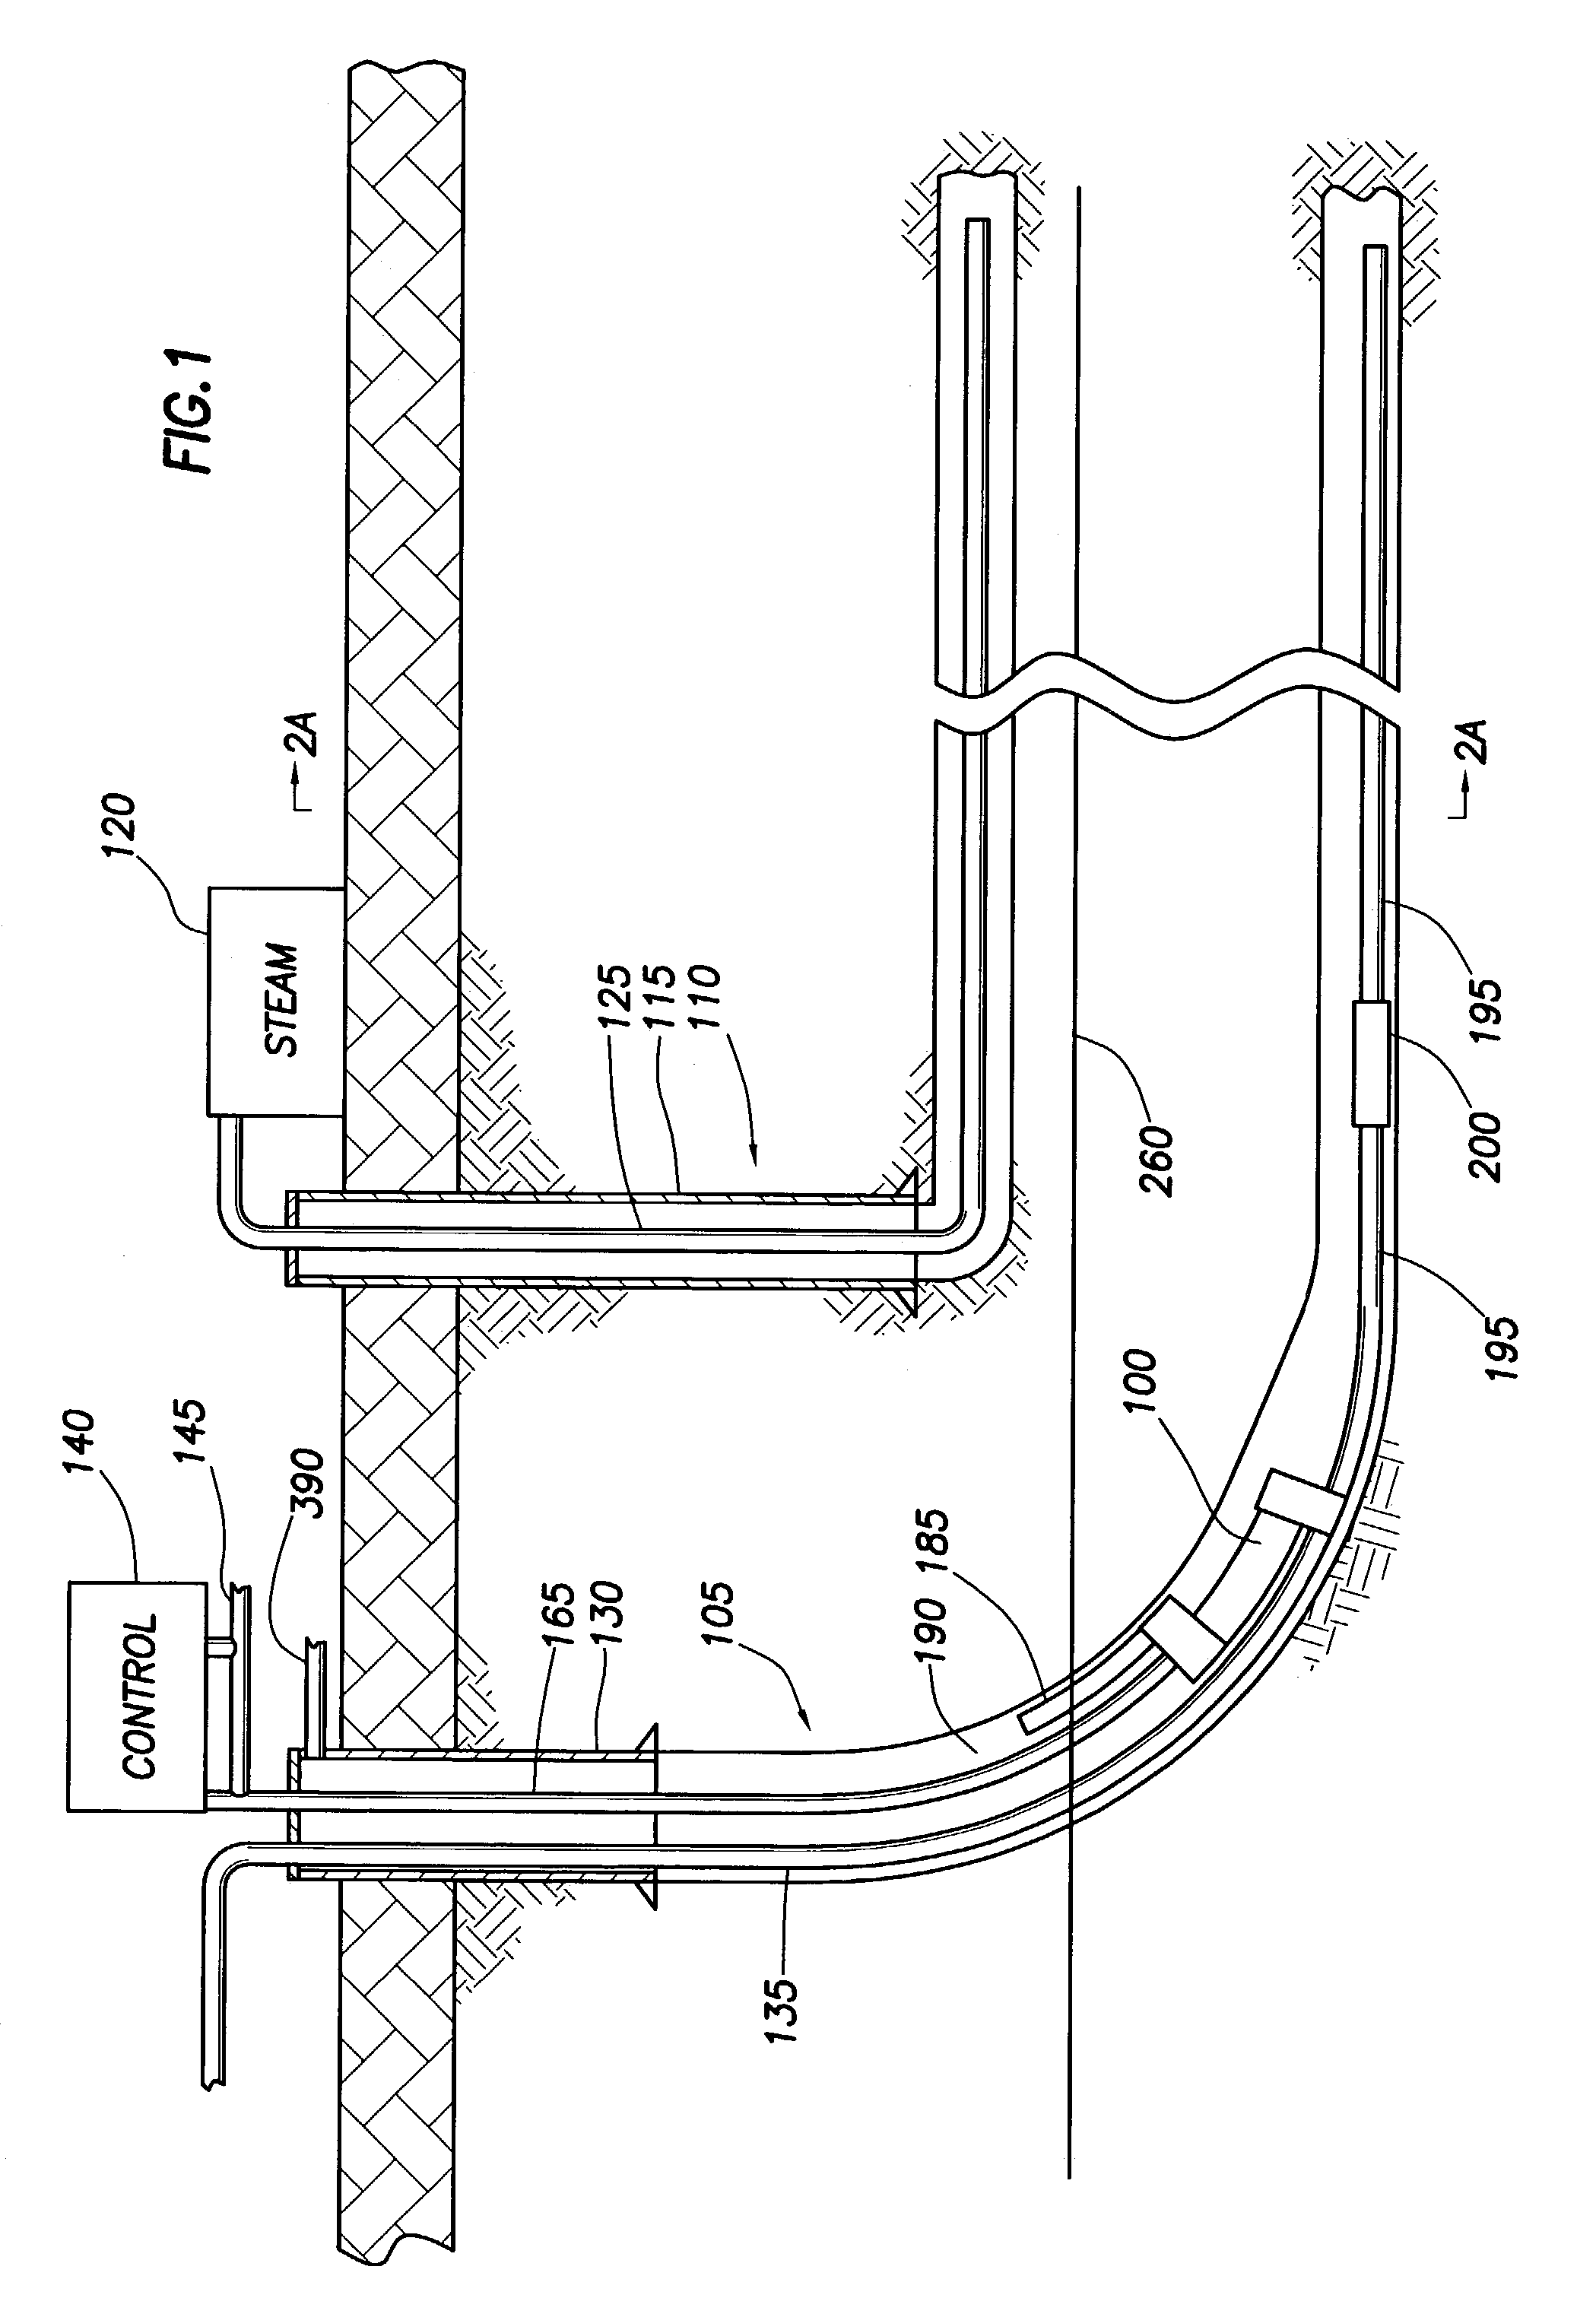 Gas operated pump for hydrocarbon wells